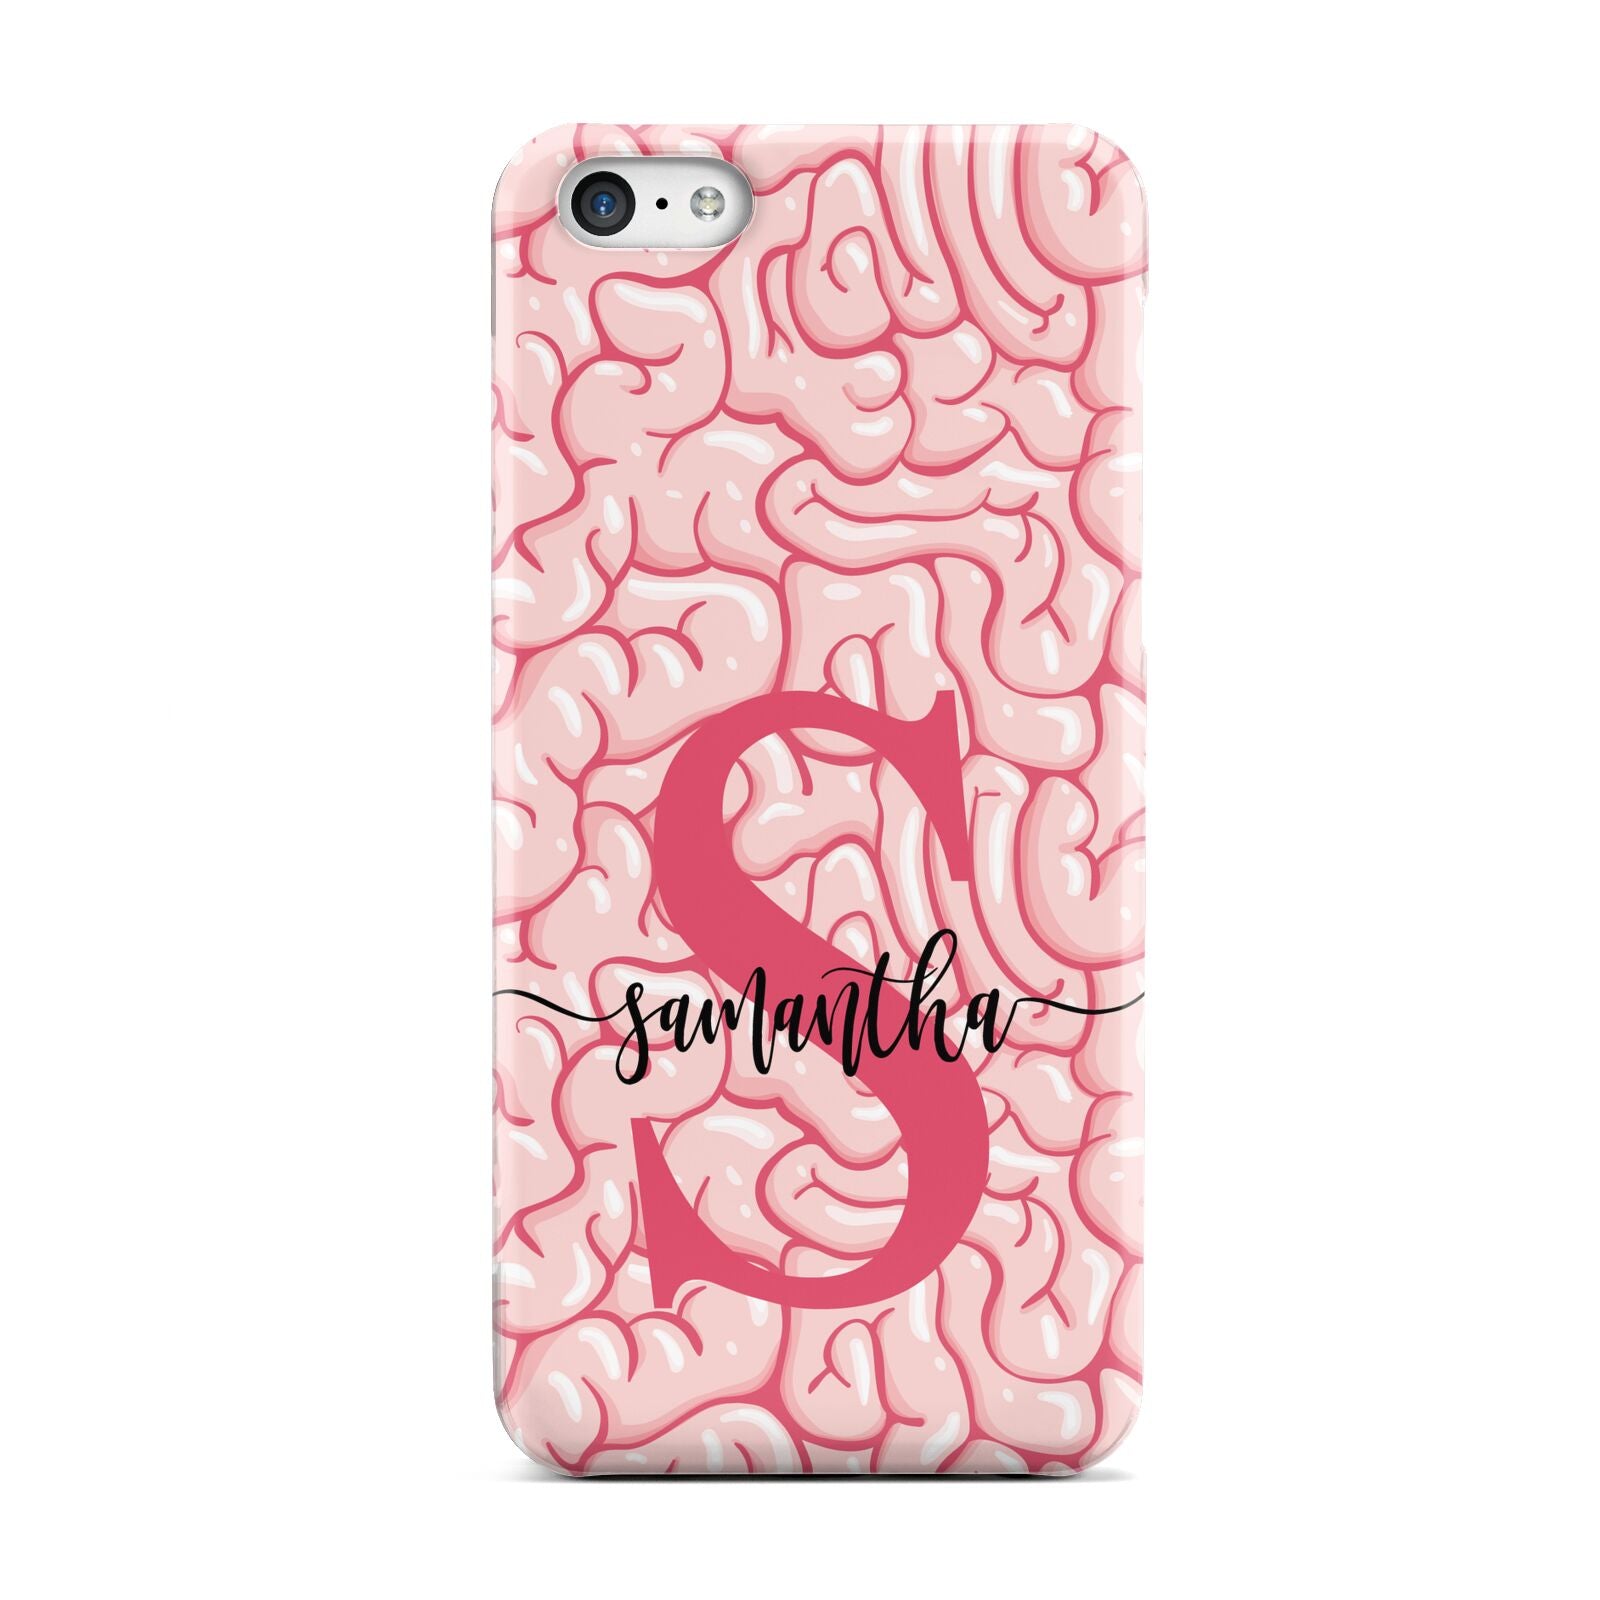 Brain Background with Monogram and Text Apple iPhone 5c Case